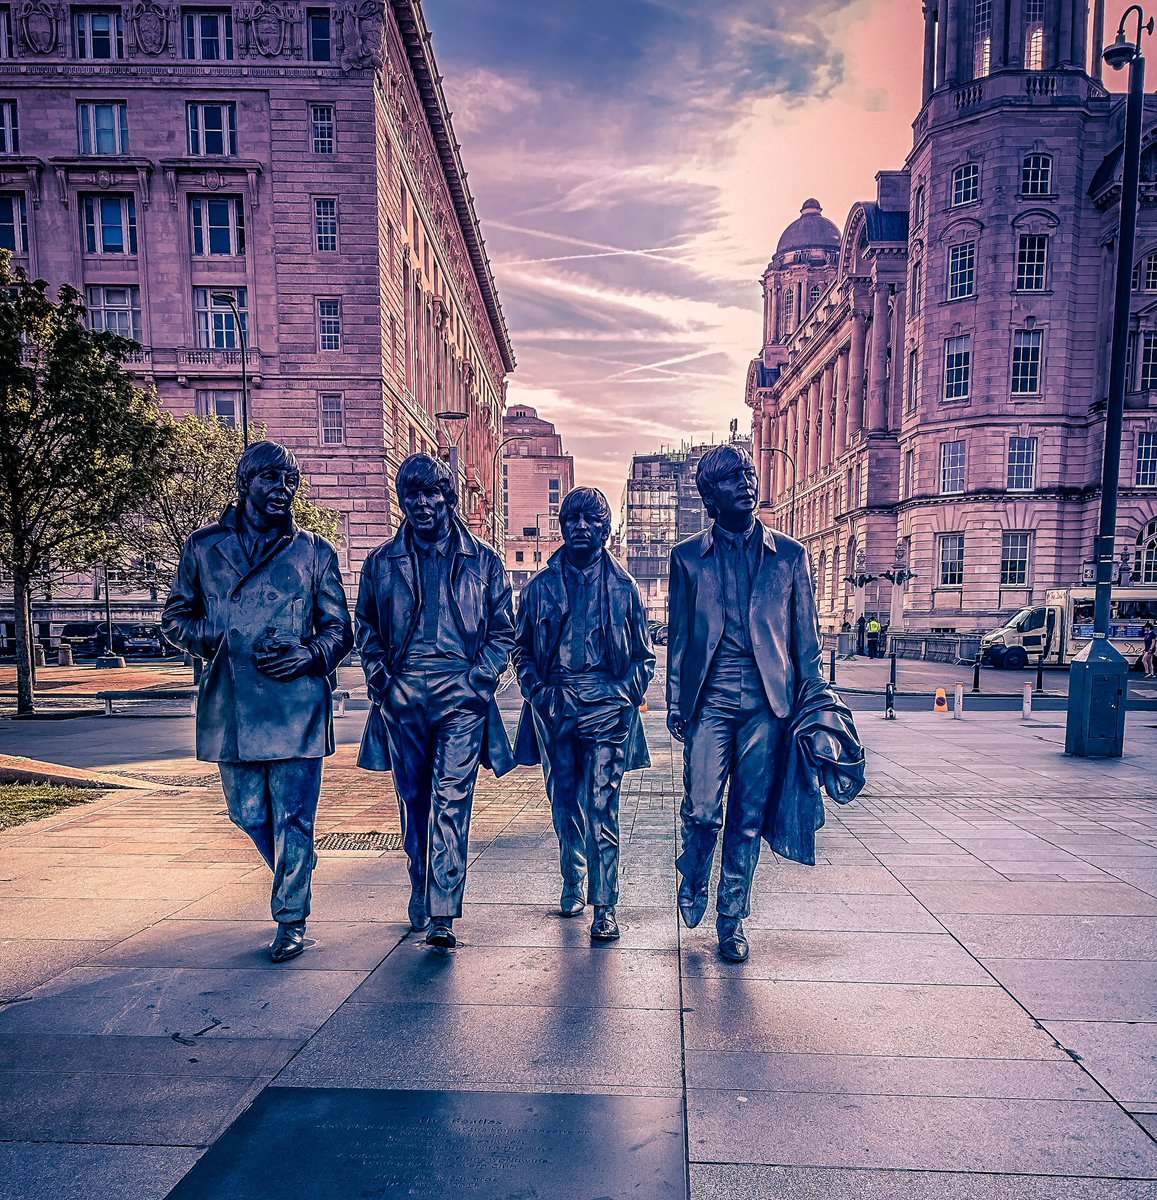 The Fab Four 📸🎵 #Photography #Photographer #Liverpool #Canon #LiverpoolPhotography #photosofliverpool #beatles #beatlesstatue #pierhead #albertdock #liverpoolwaterfront #fabfour